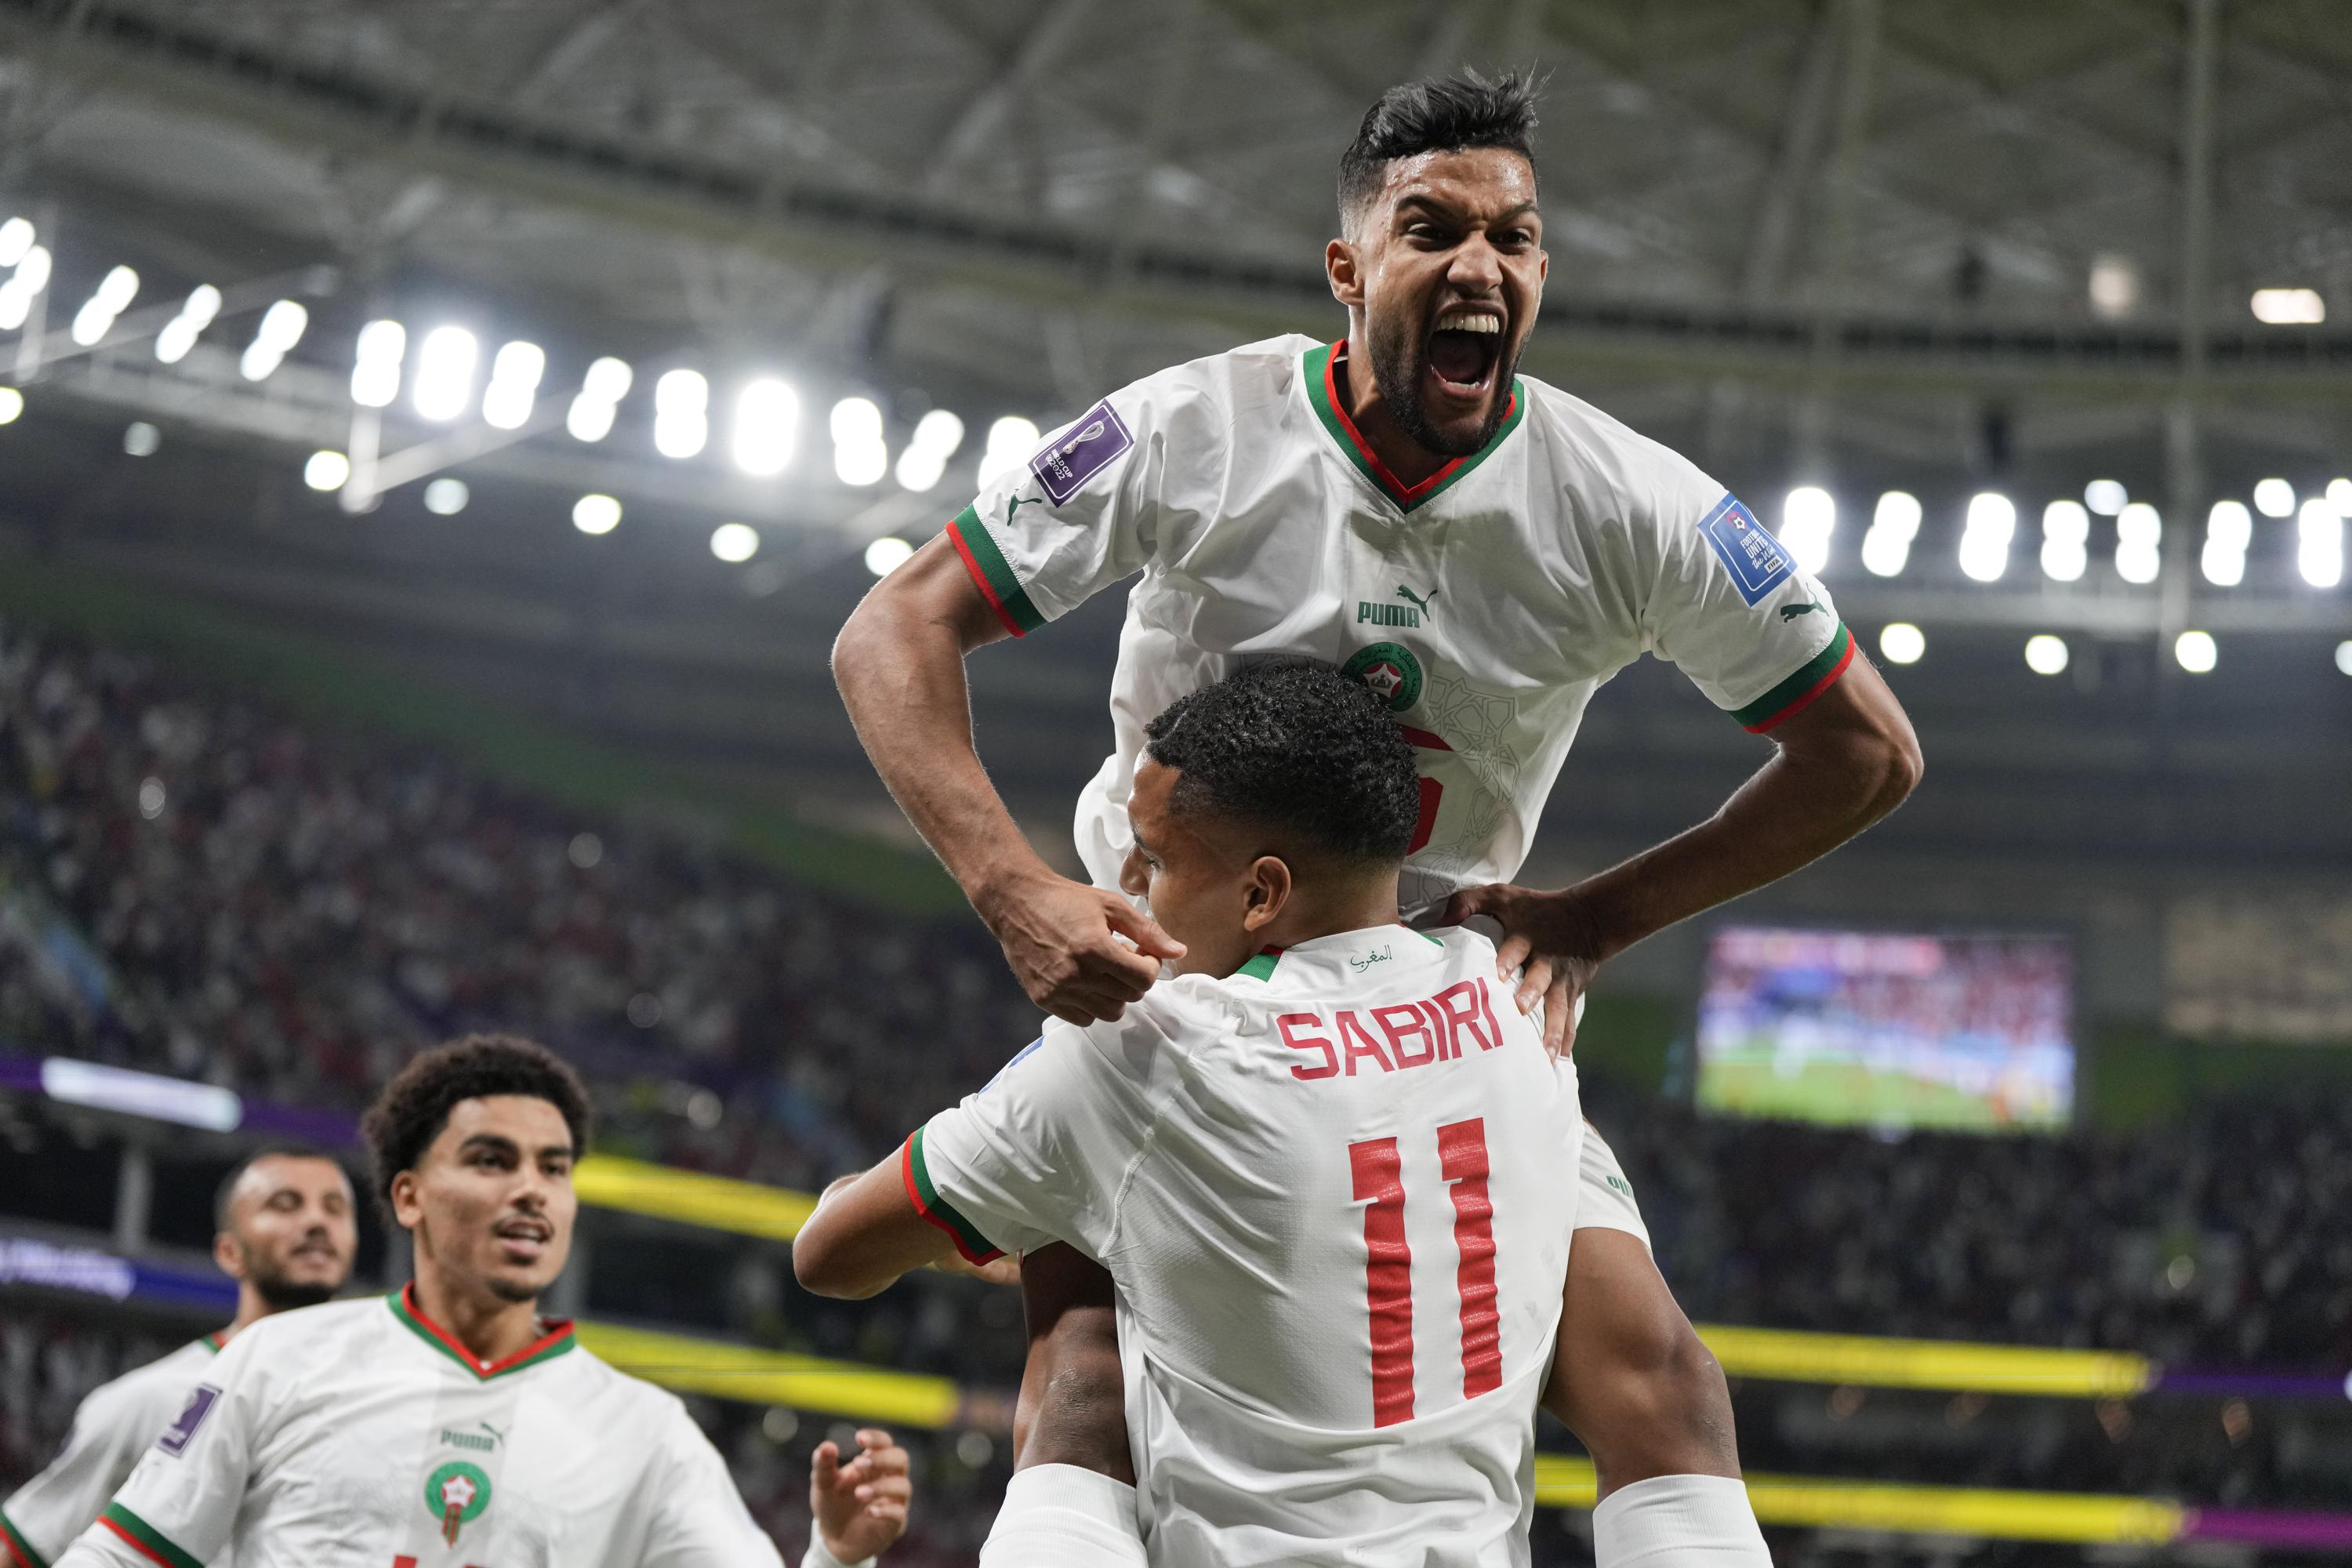 Morocco looks to advance in World Cup, Canada hopes for win